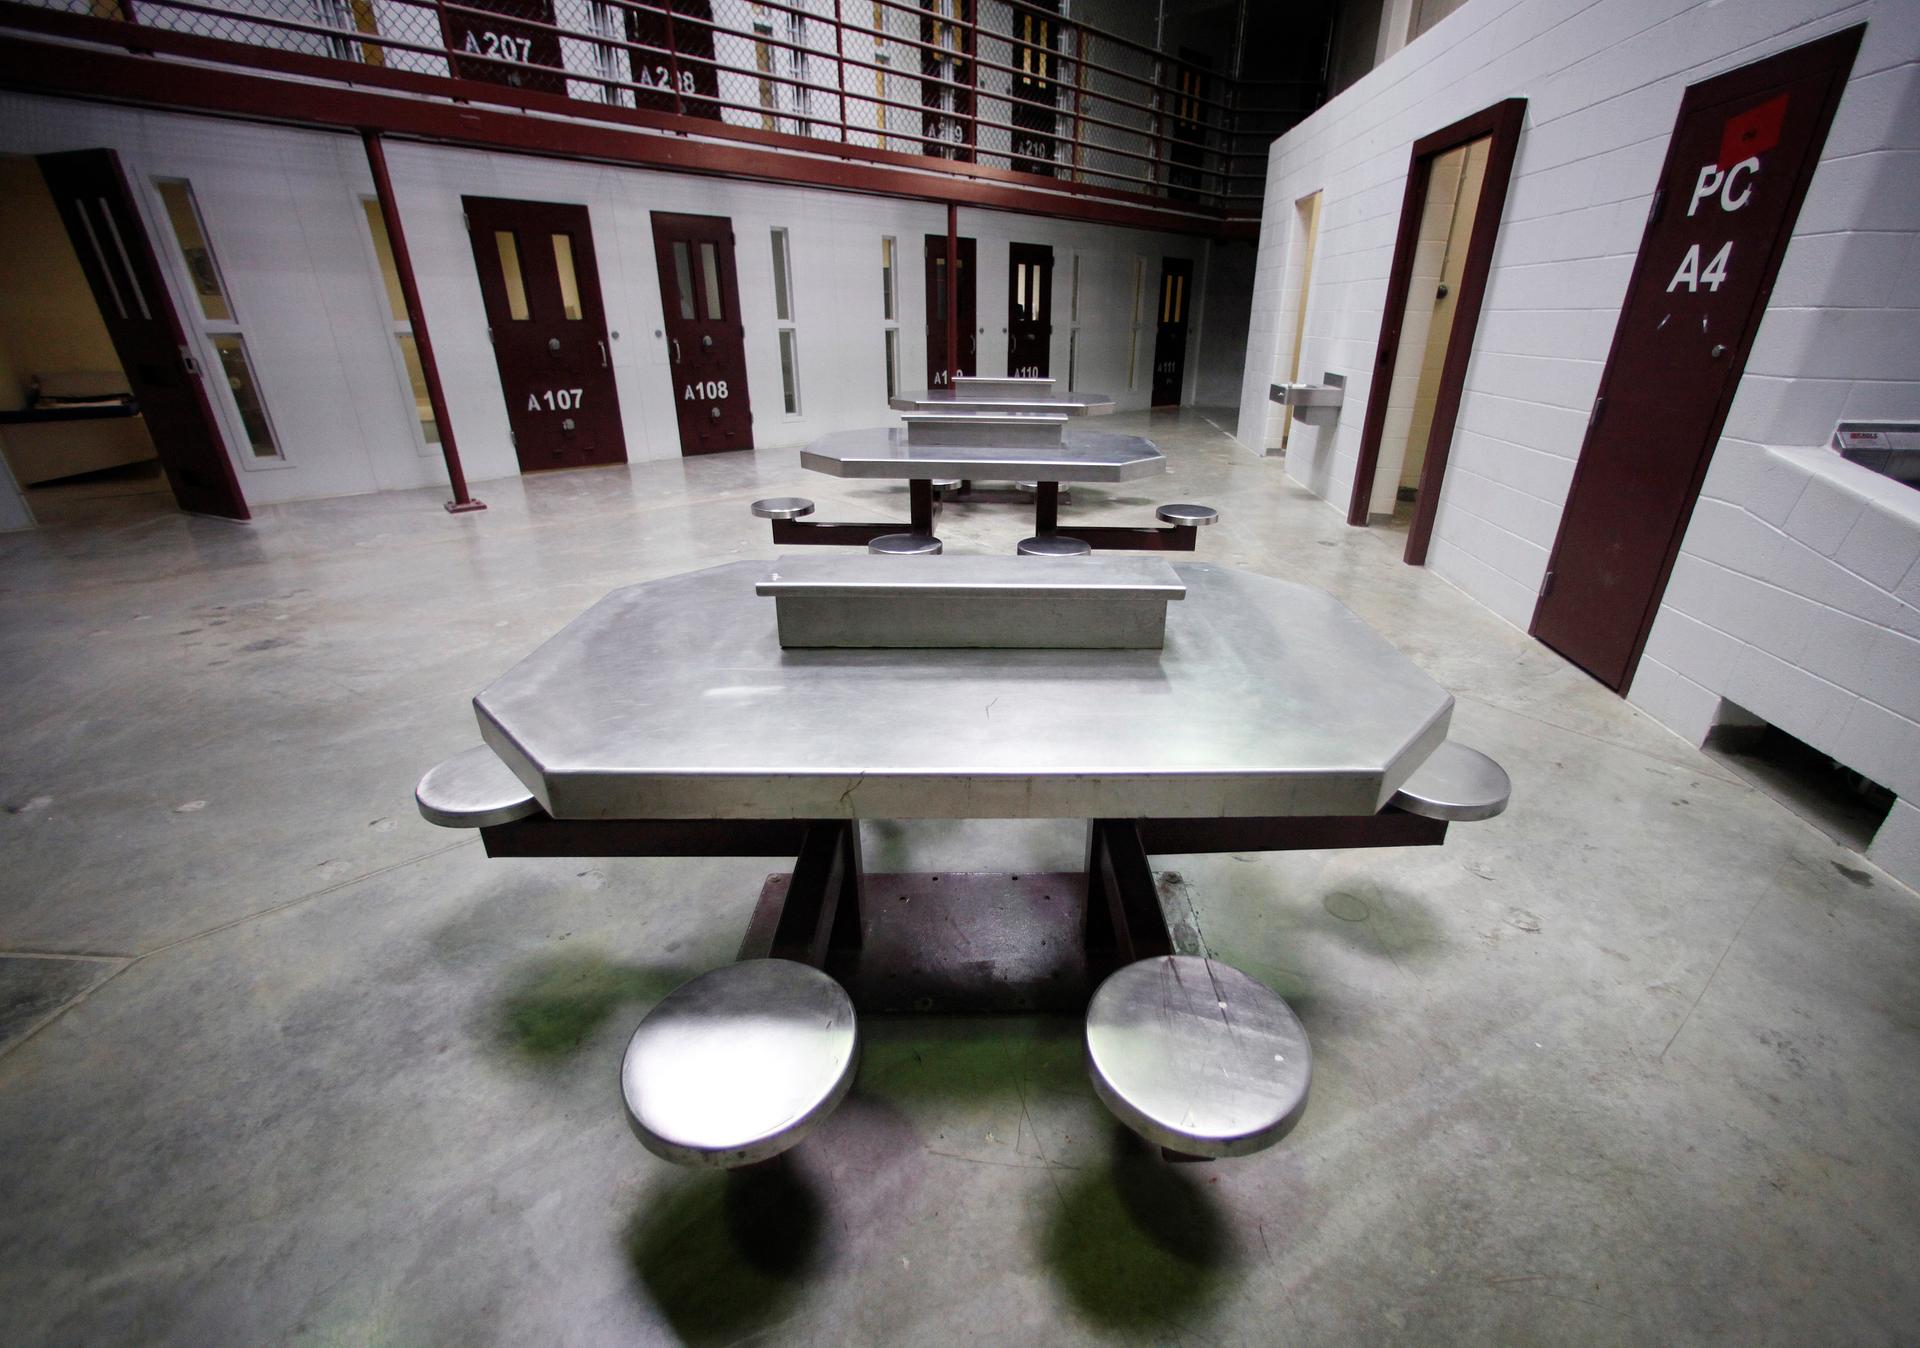 The interior of an unoccupied communal cellblock is seen at Camp VI, a prison used to house detainees at the U.S. Naval Base at Guantanamo Bay, March 5, 2013.